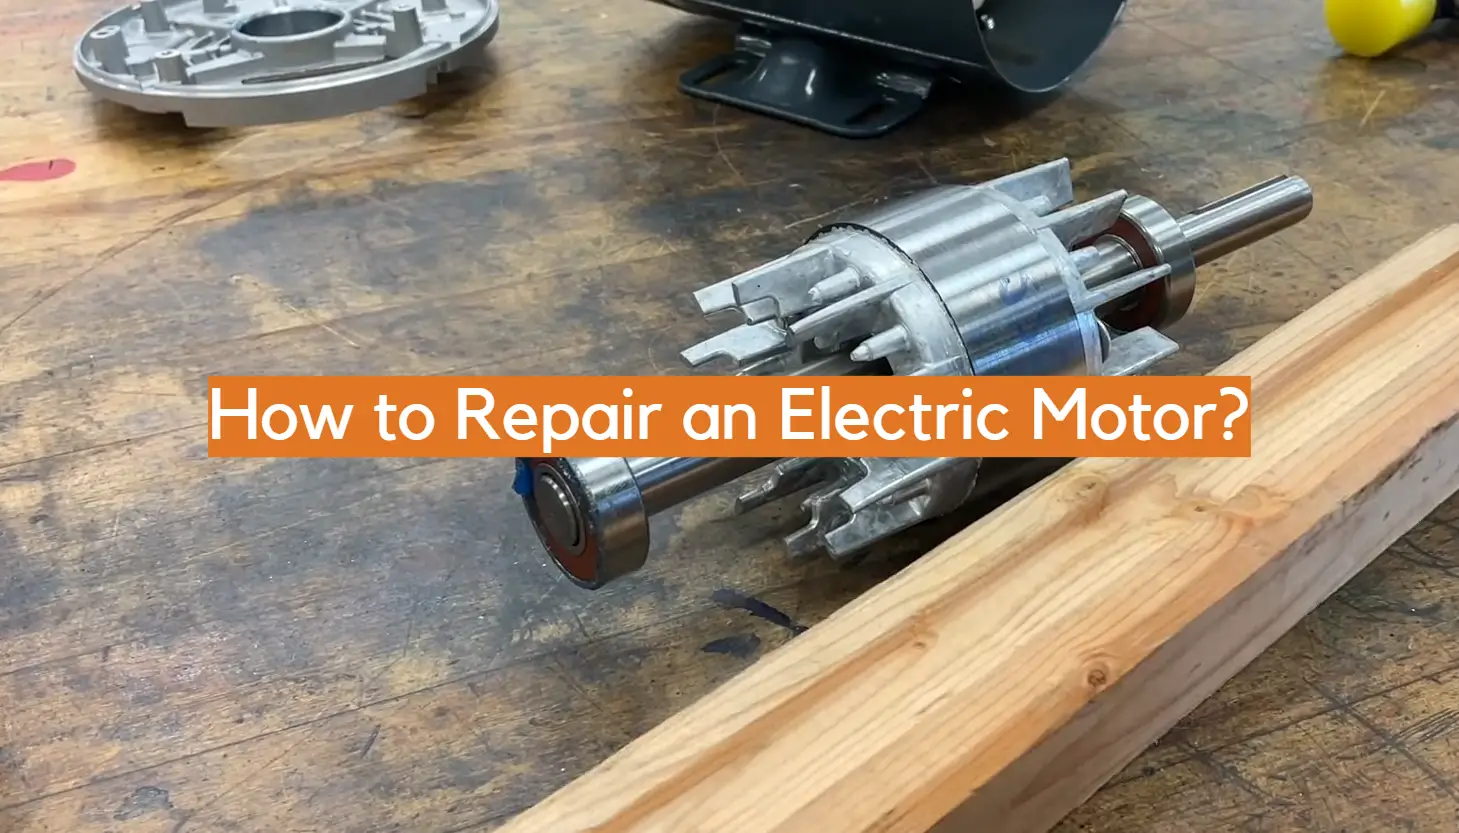 How to Repair an Electric Motor?